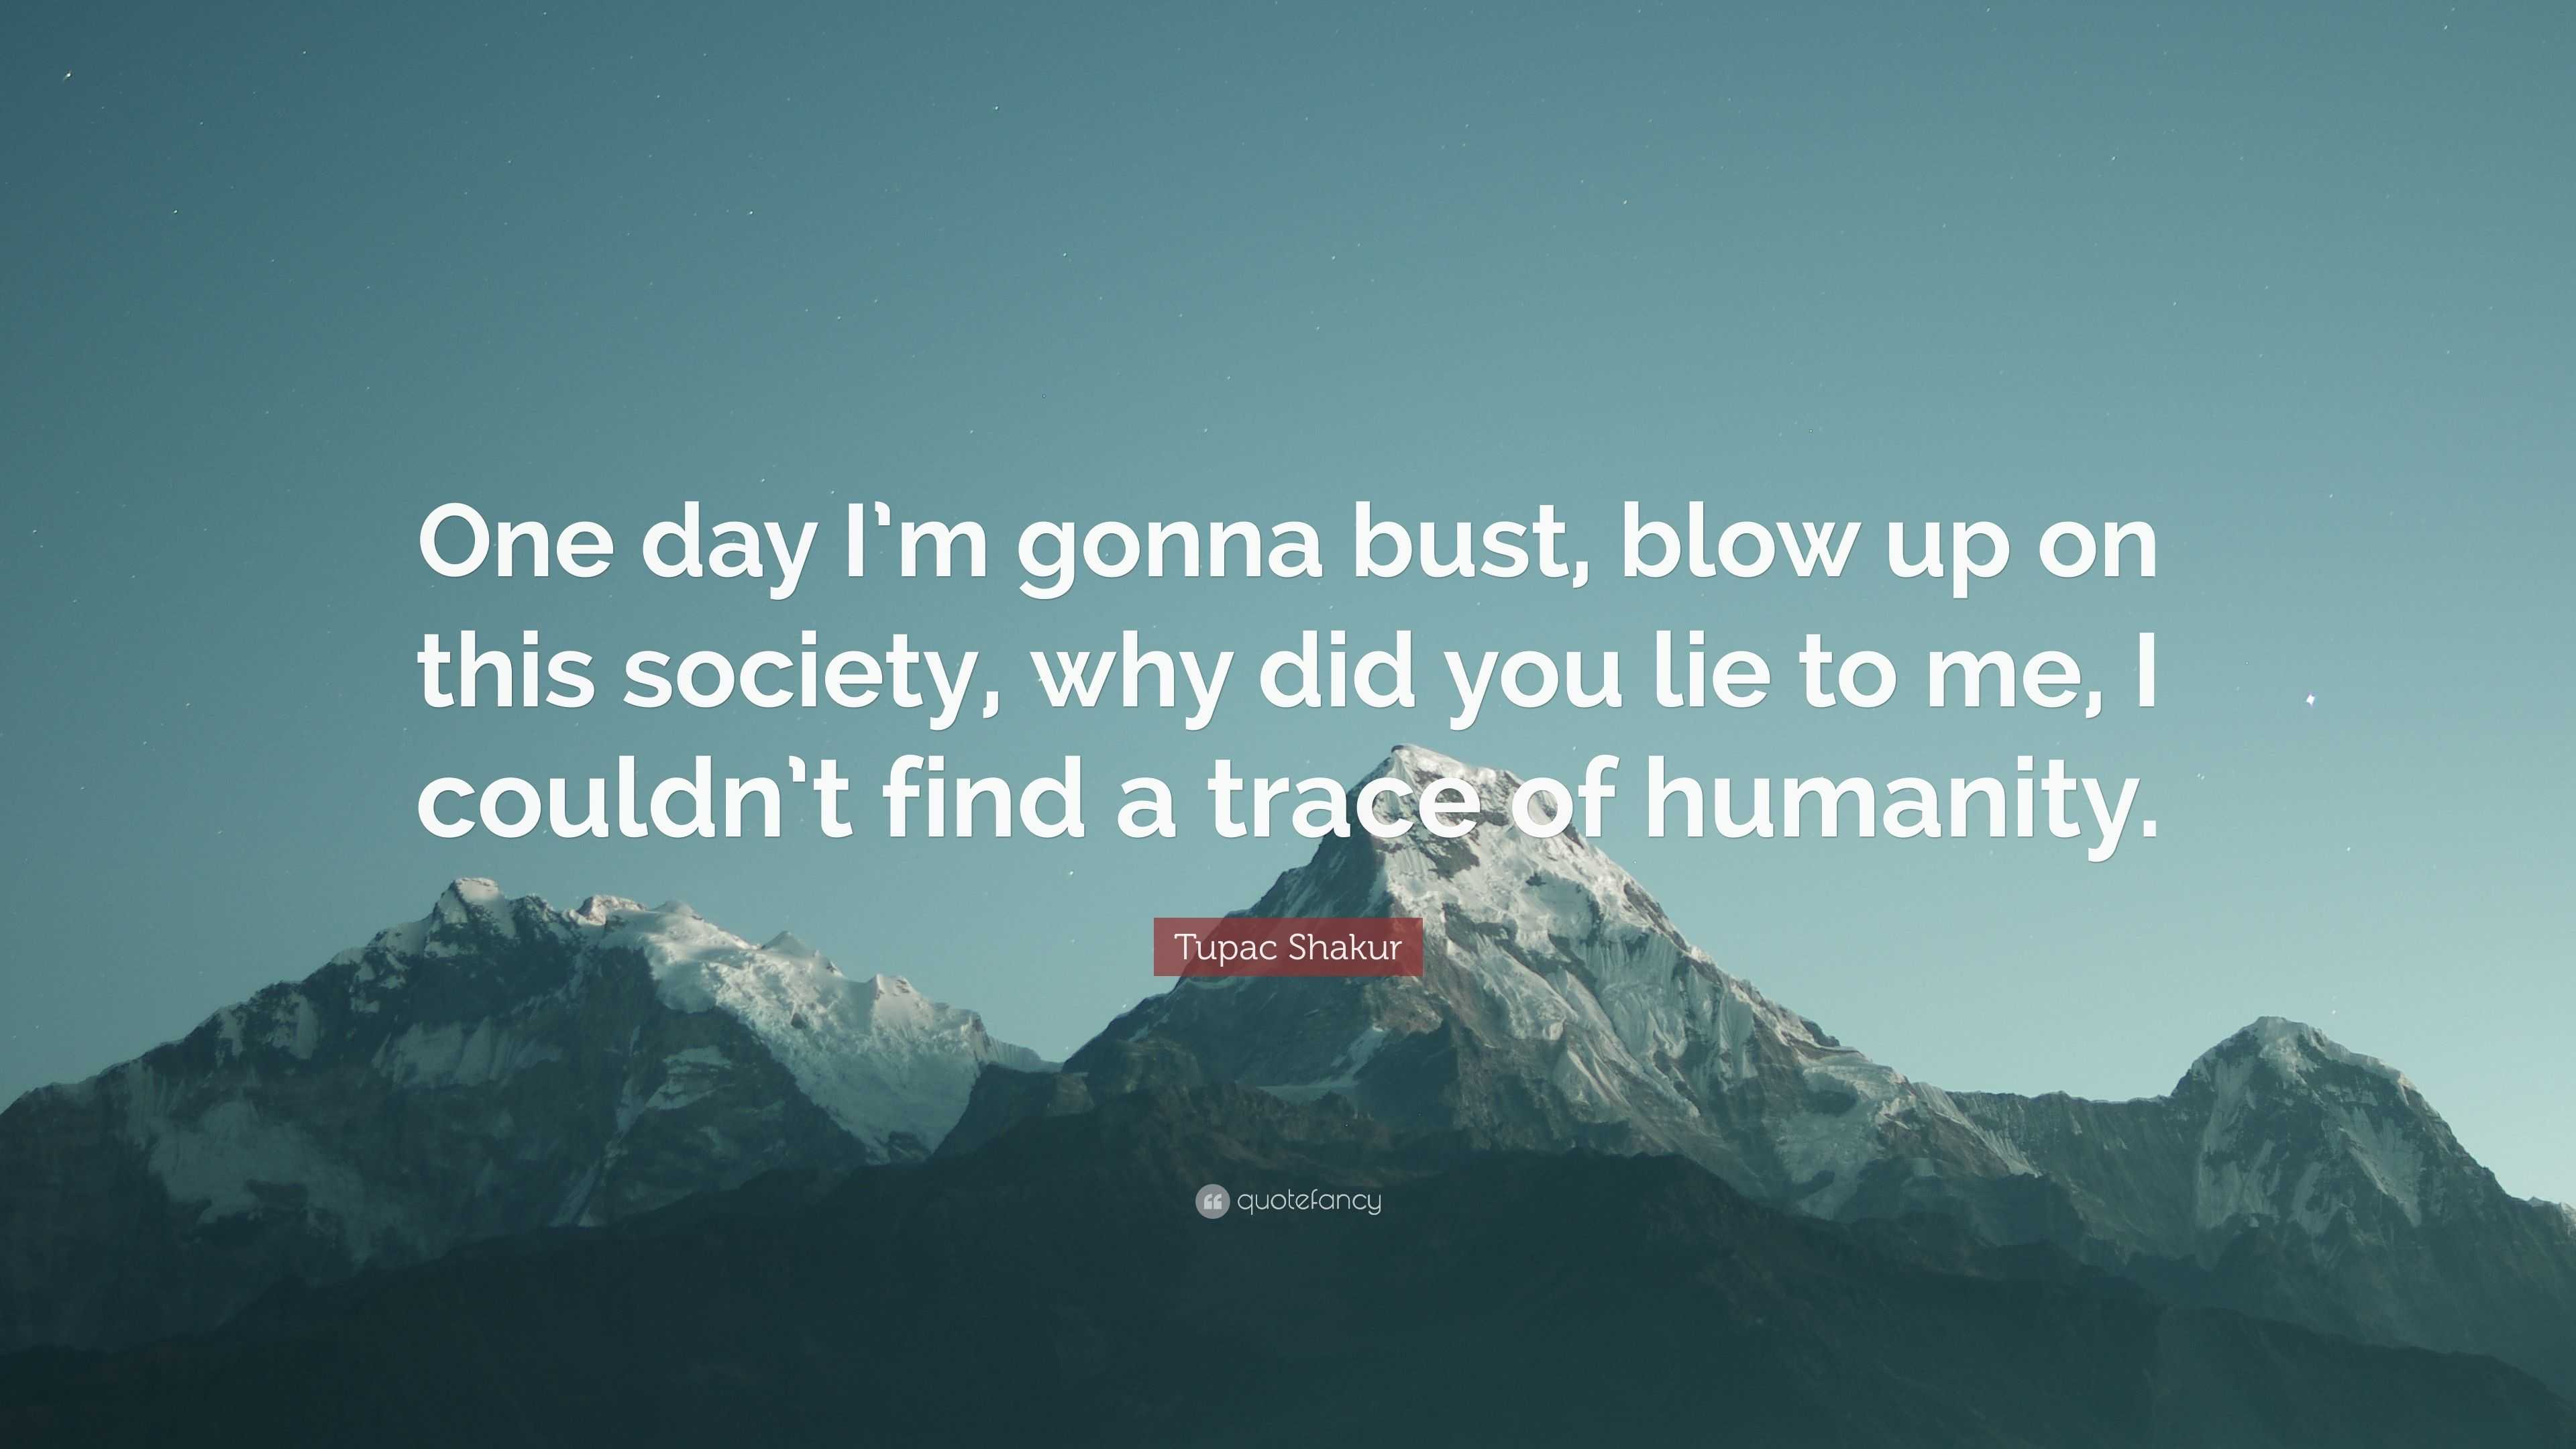 Tupac Shakur Quote: “One day I’m gonna bust, blow up on this society ...